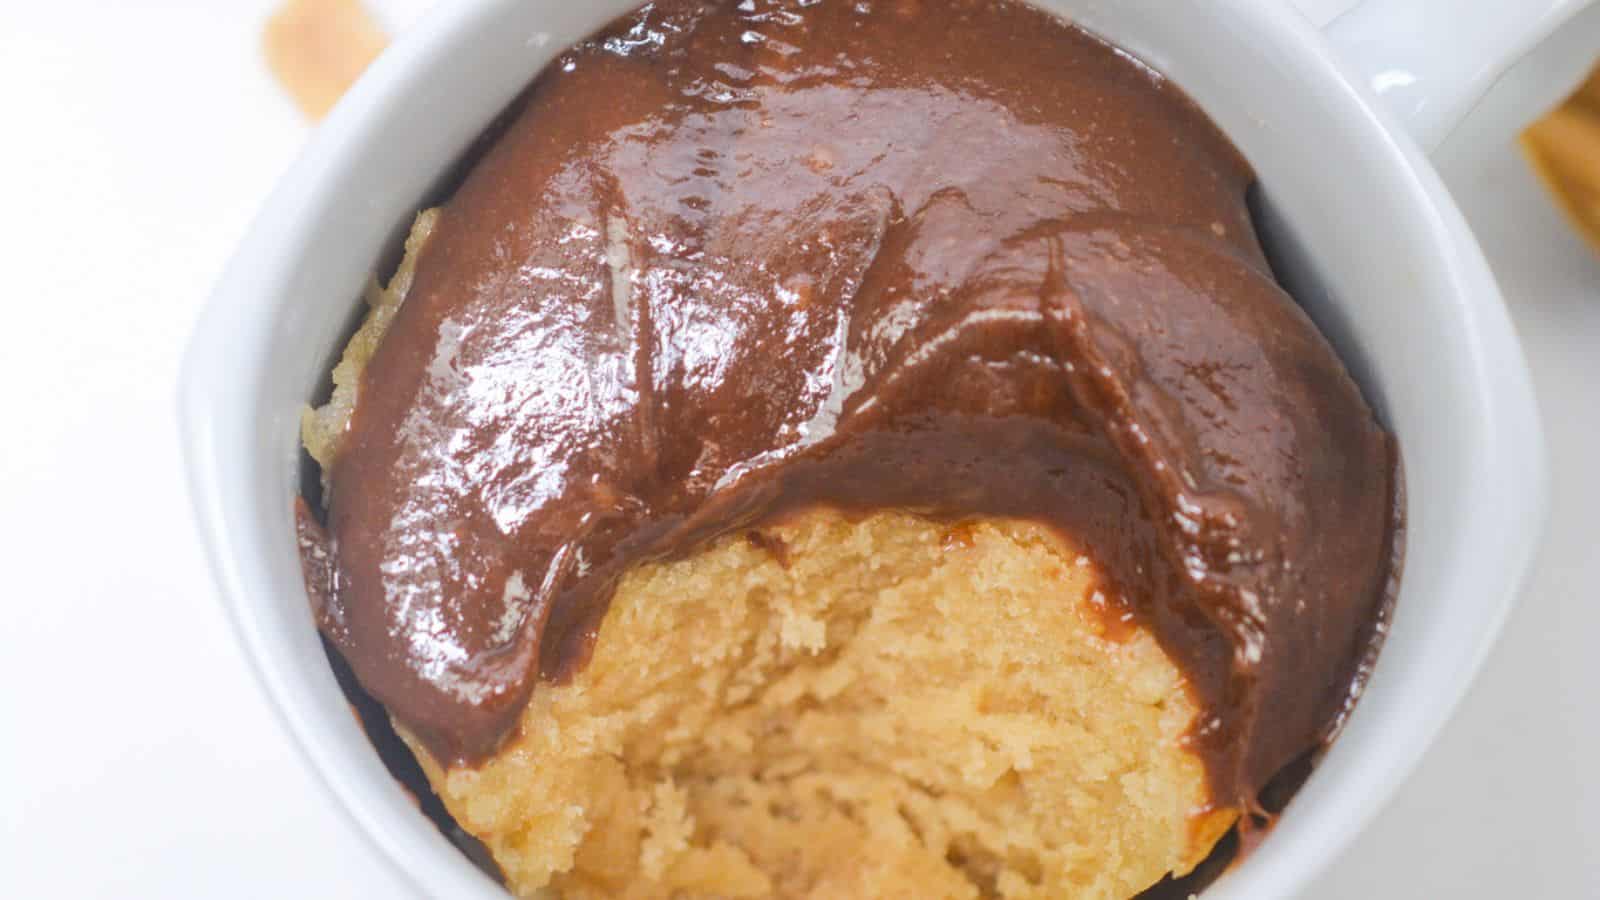 A peanut butter mug cake topped with a smooth, glossy chocolate sauce, viewed from above.